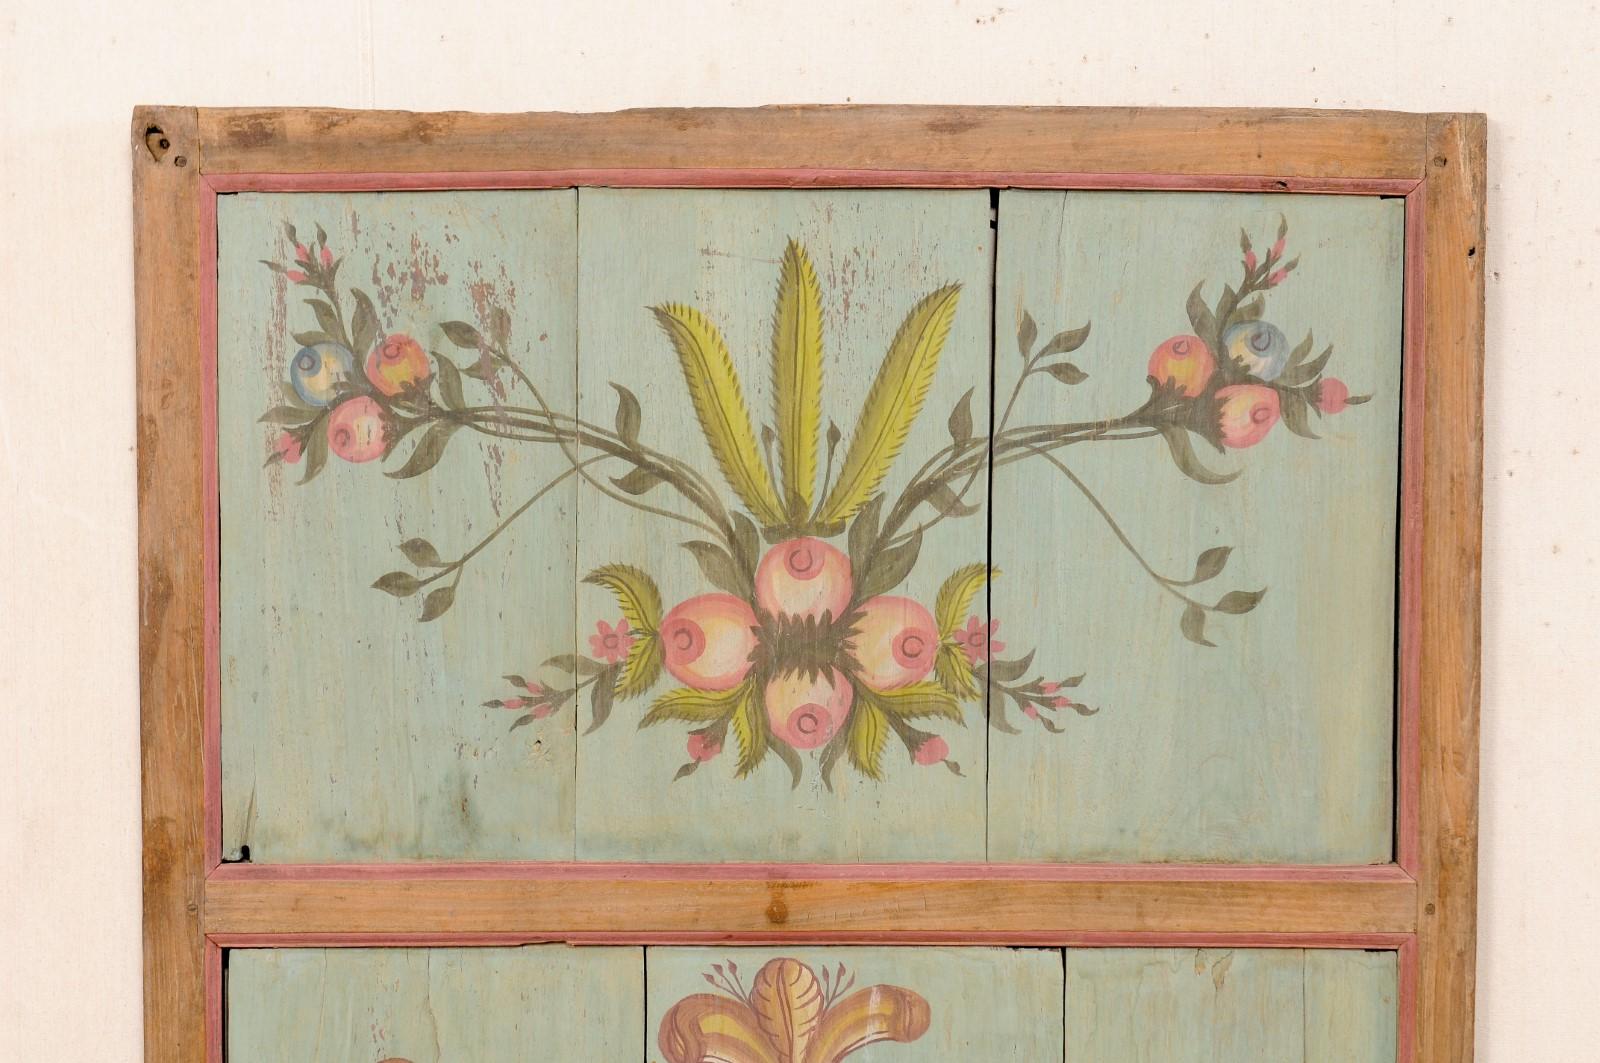 European 19th C. Hand-Painted Wooden Wall Panel in Floral Motif For Sale